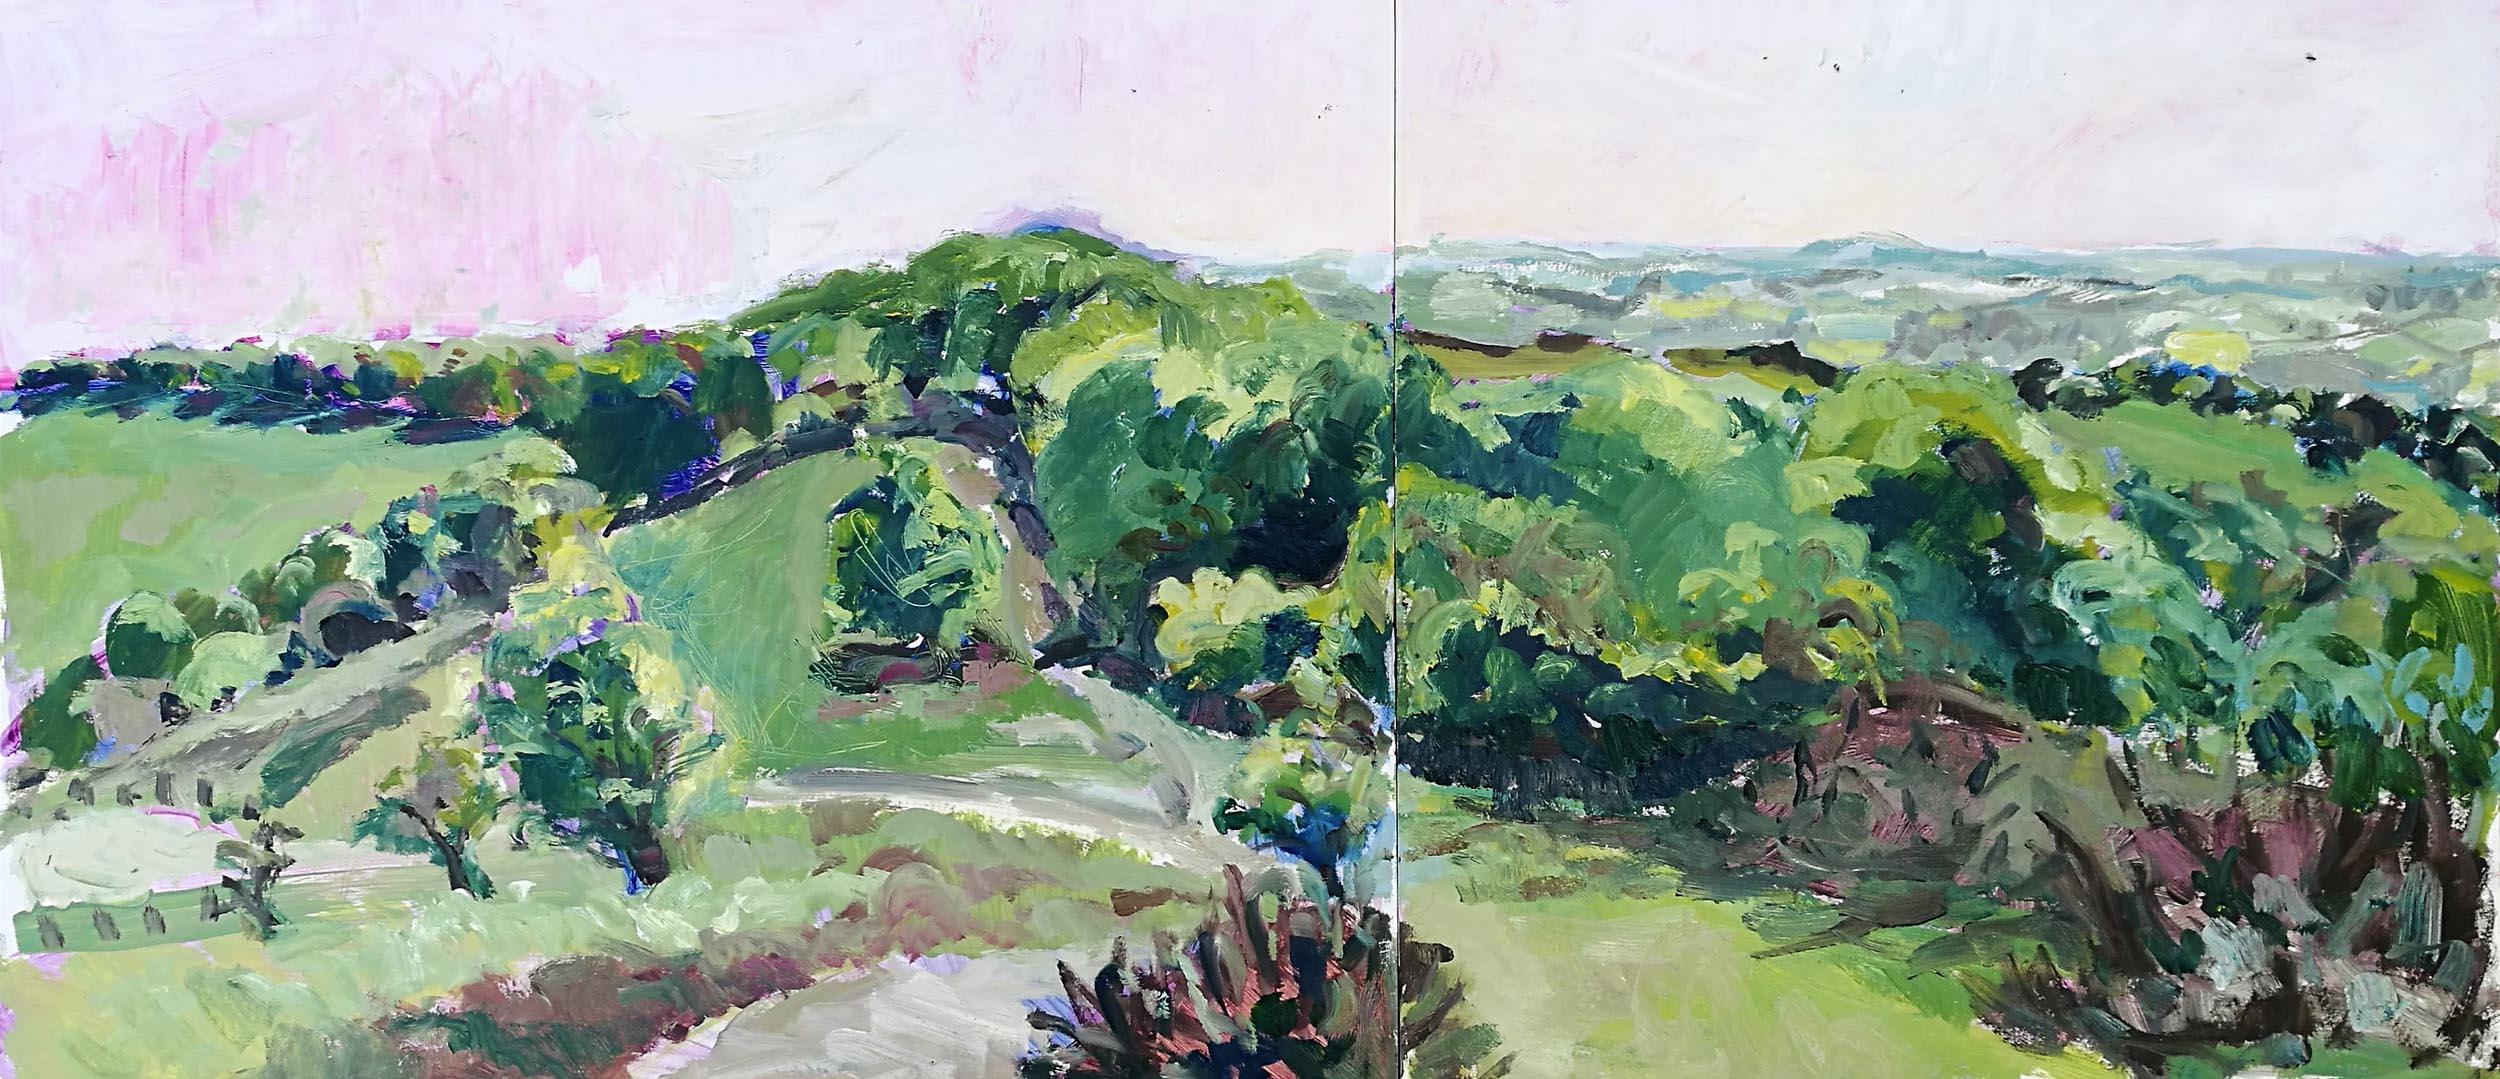 Lisa Takahashi Landscape Painting - The Quantocks From Crowcombe, an abstract landscape oil painting, diptych